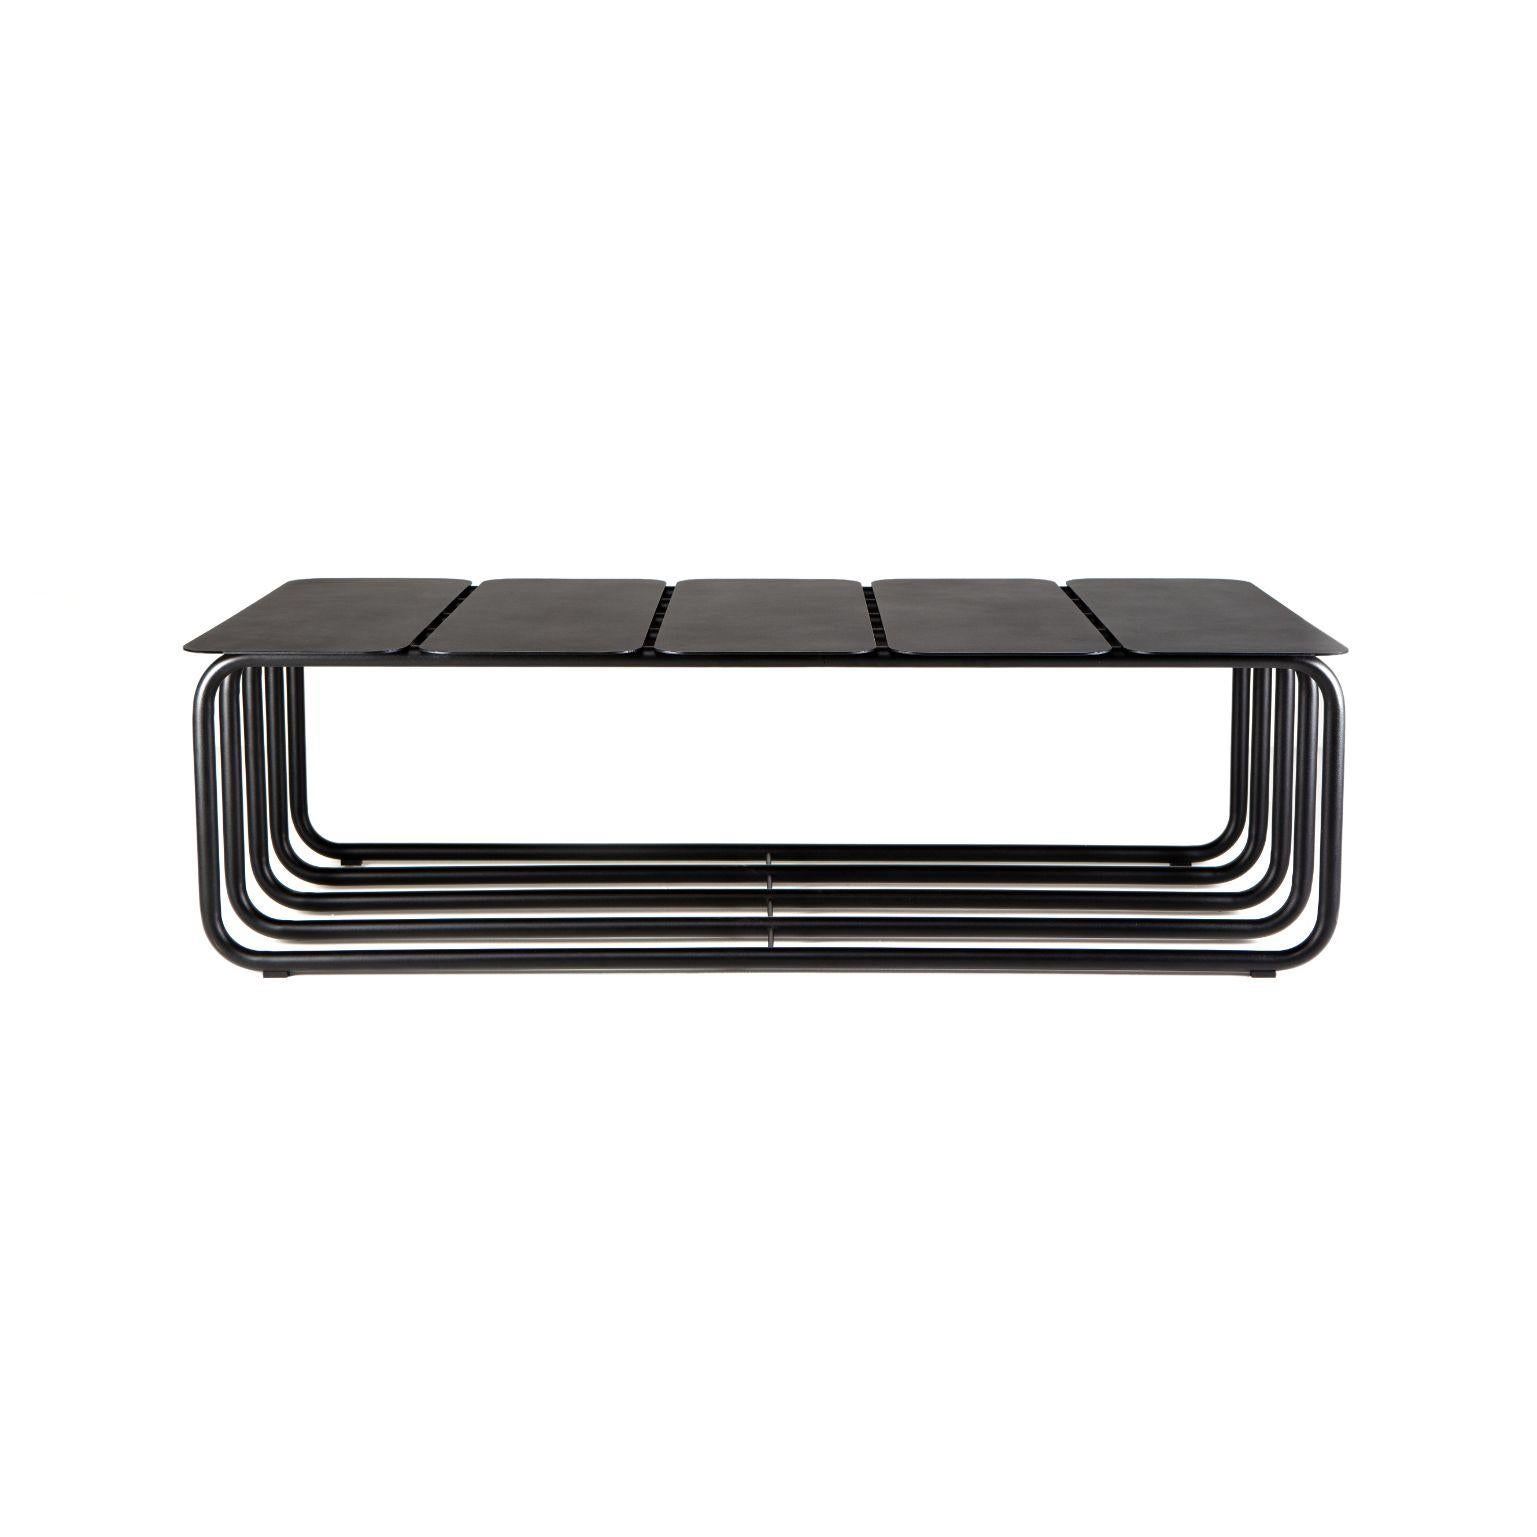 Dureza - coffee table by Cultivado Em Casa
Dimensions: 120 x 60 x 35 cm
Materials: Carbon steel and electrostatic painting.

Carbon steel reigns as raw material, guiding both the simple and rigorous shapes and the graphic language of this new